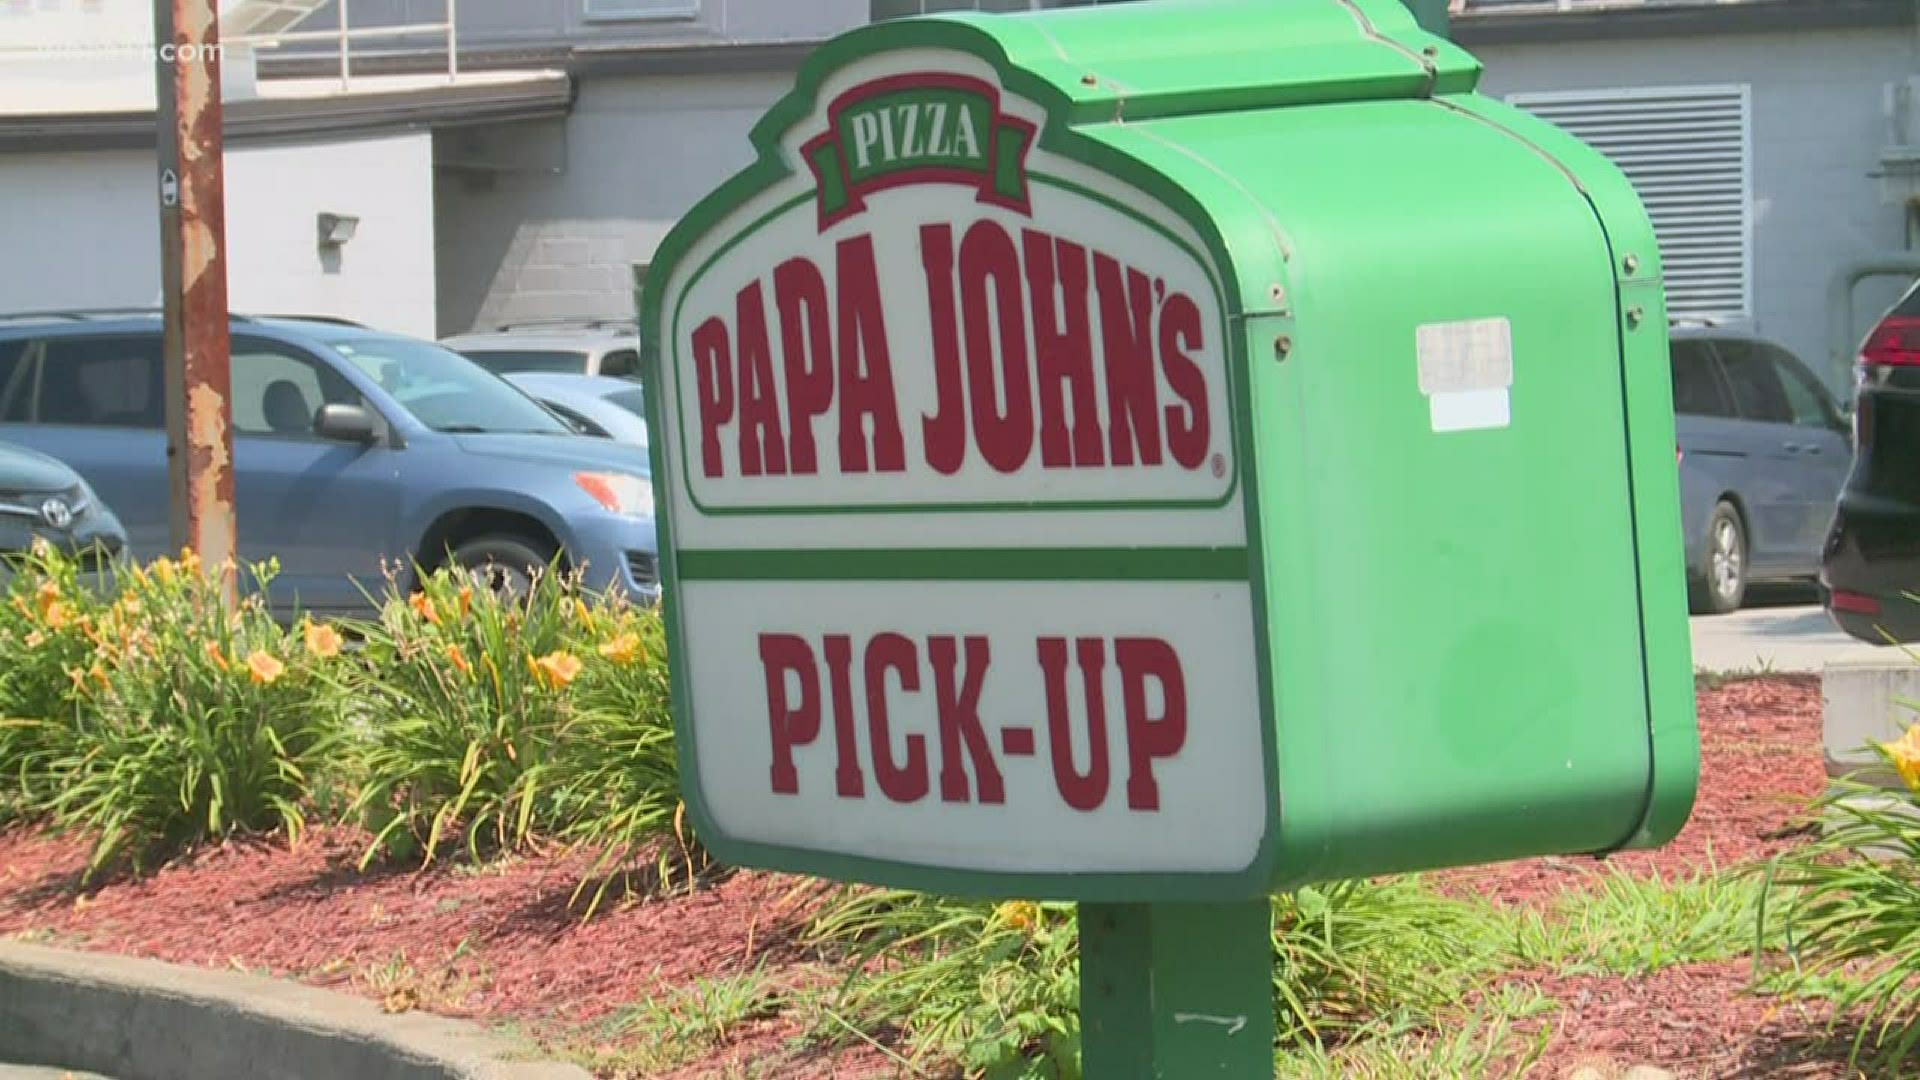 Unlike other chains dealing with food shortages, Papa John's says the coronavirus has not disrupted its supply chain.